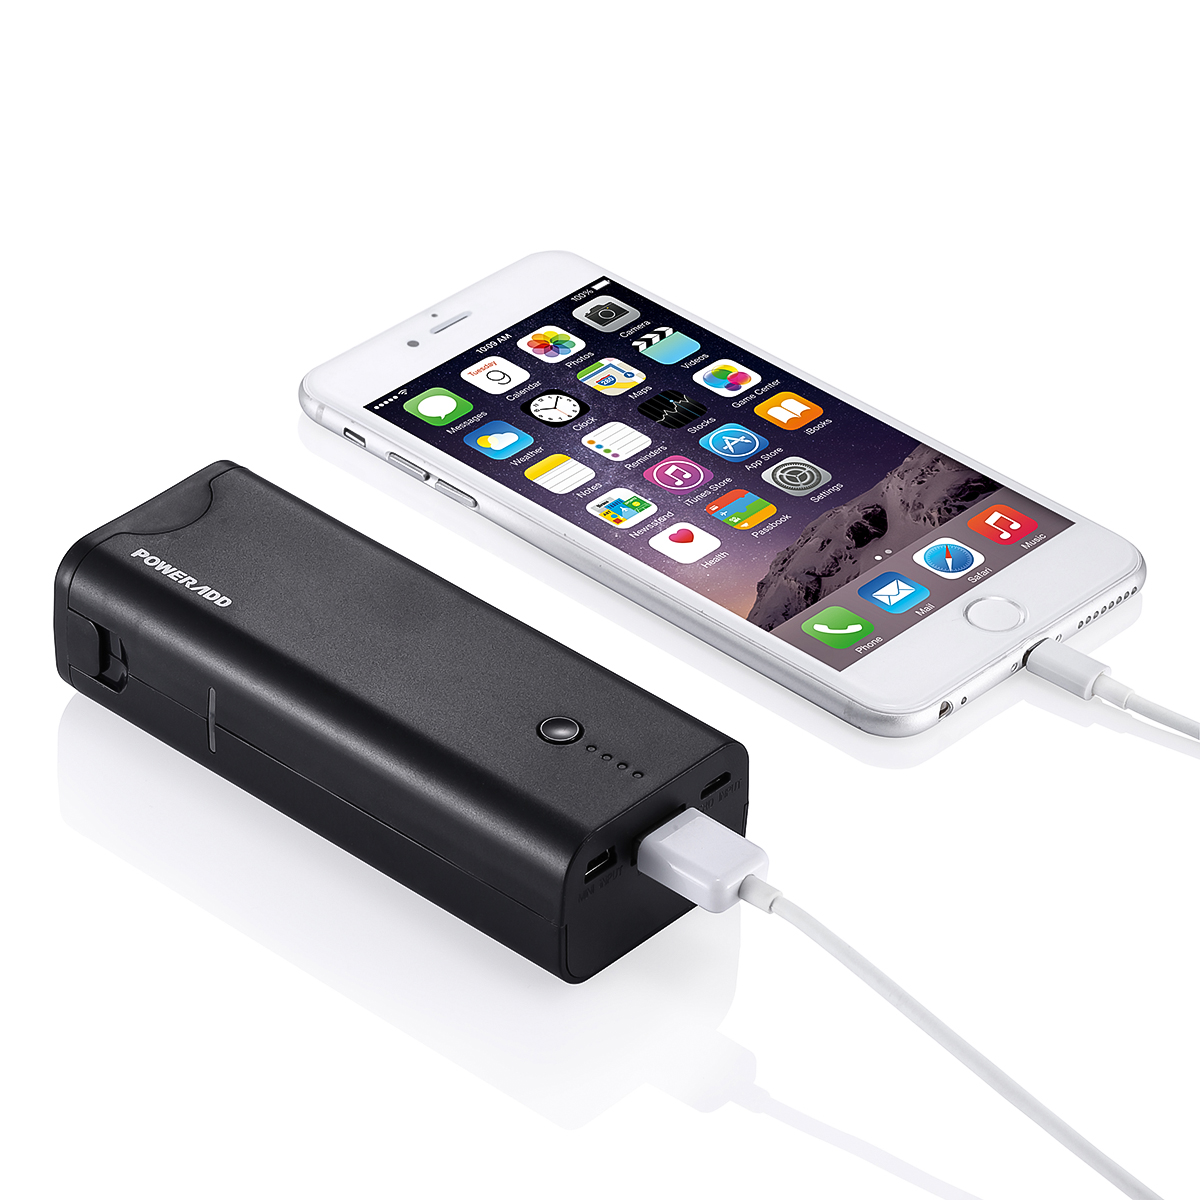 Portable charger for iphone - deals on 1001 Blocks